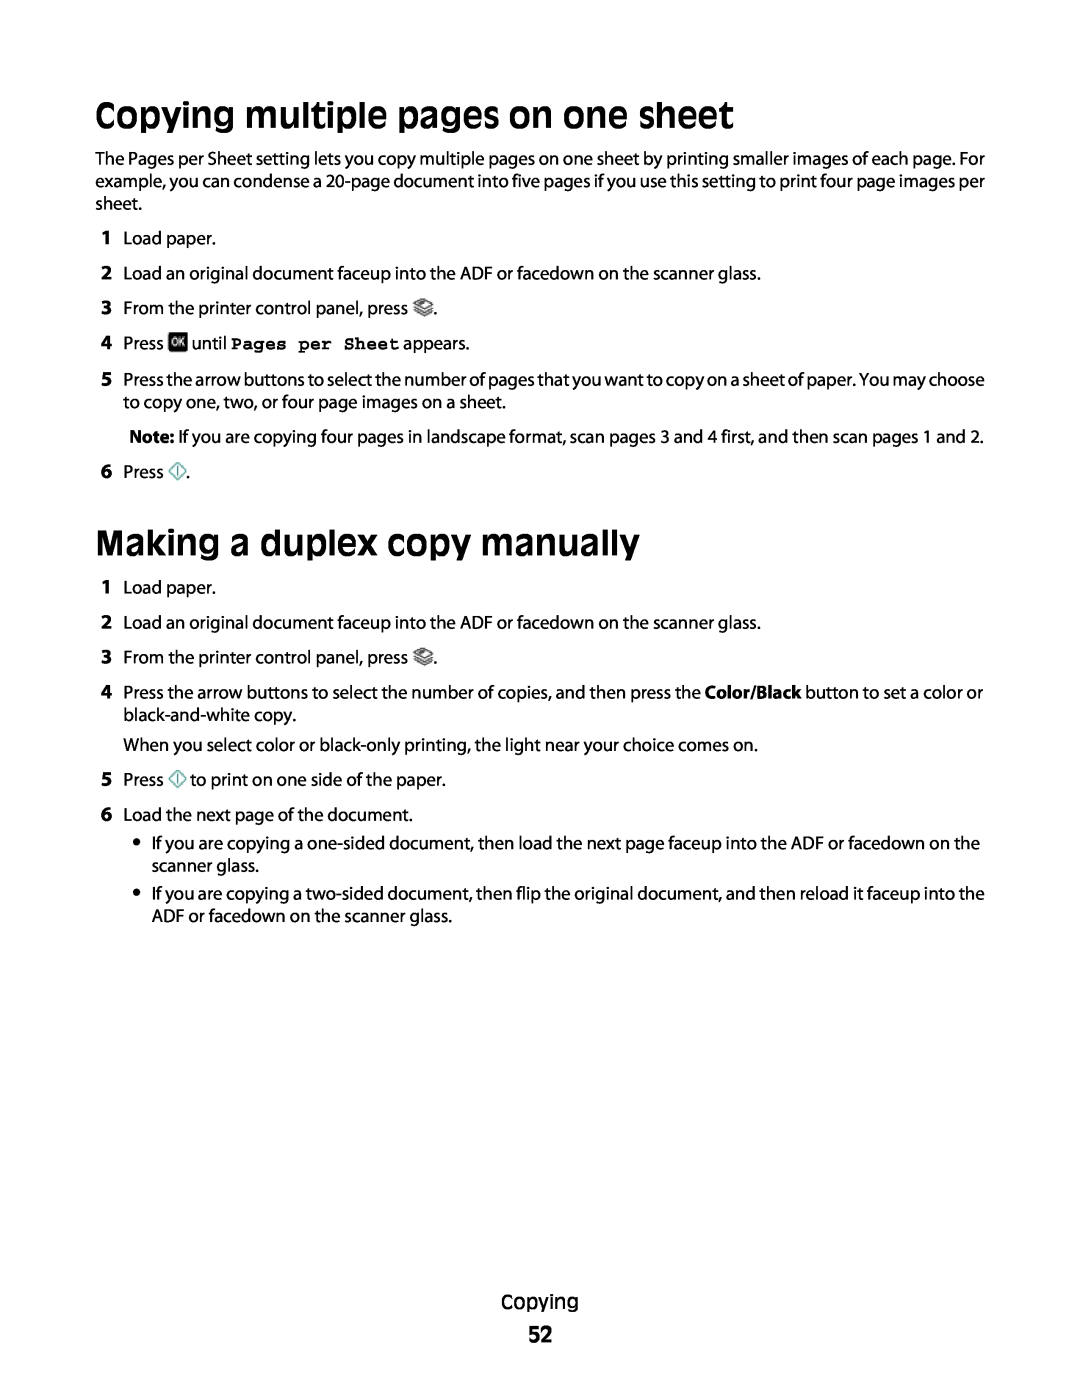 Lexmark 101, 10E Copying multiple pages on one sheet, Making a duplex copy manually 